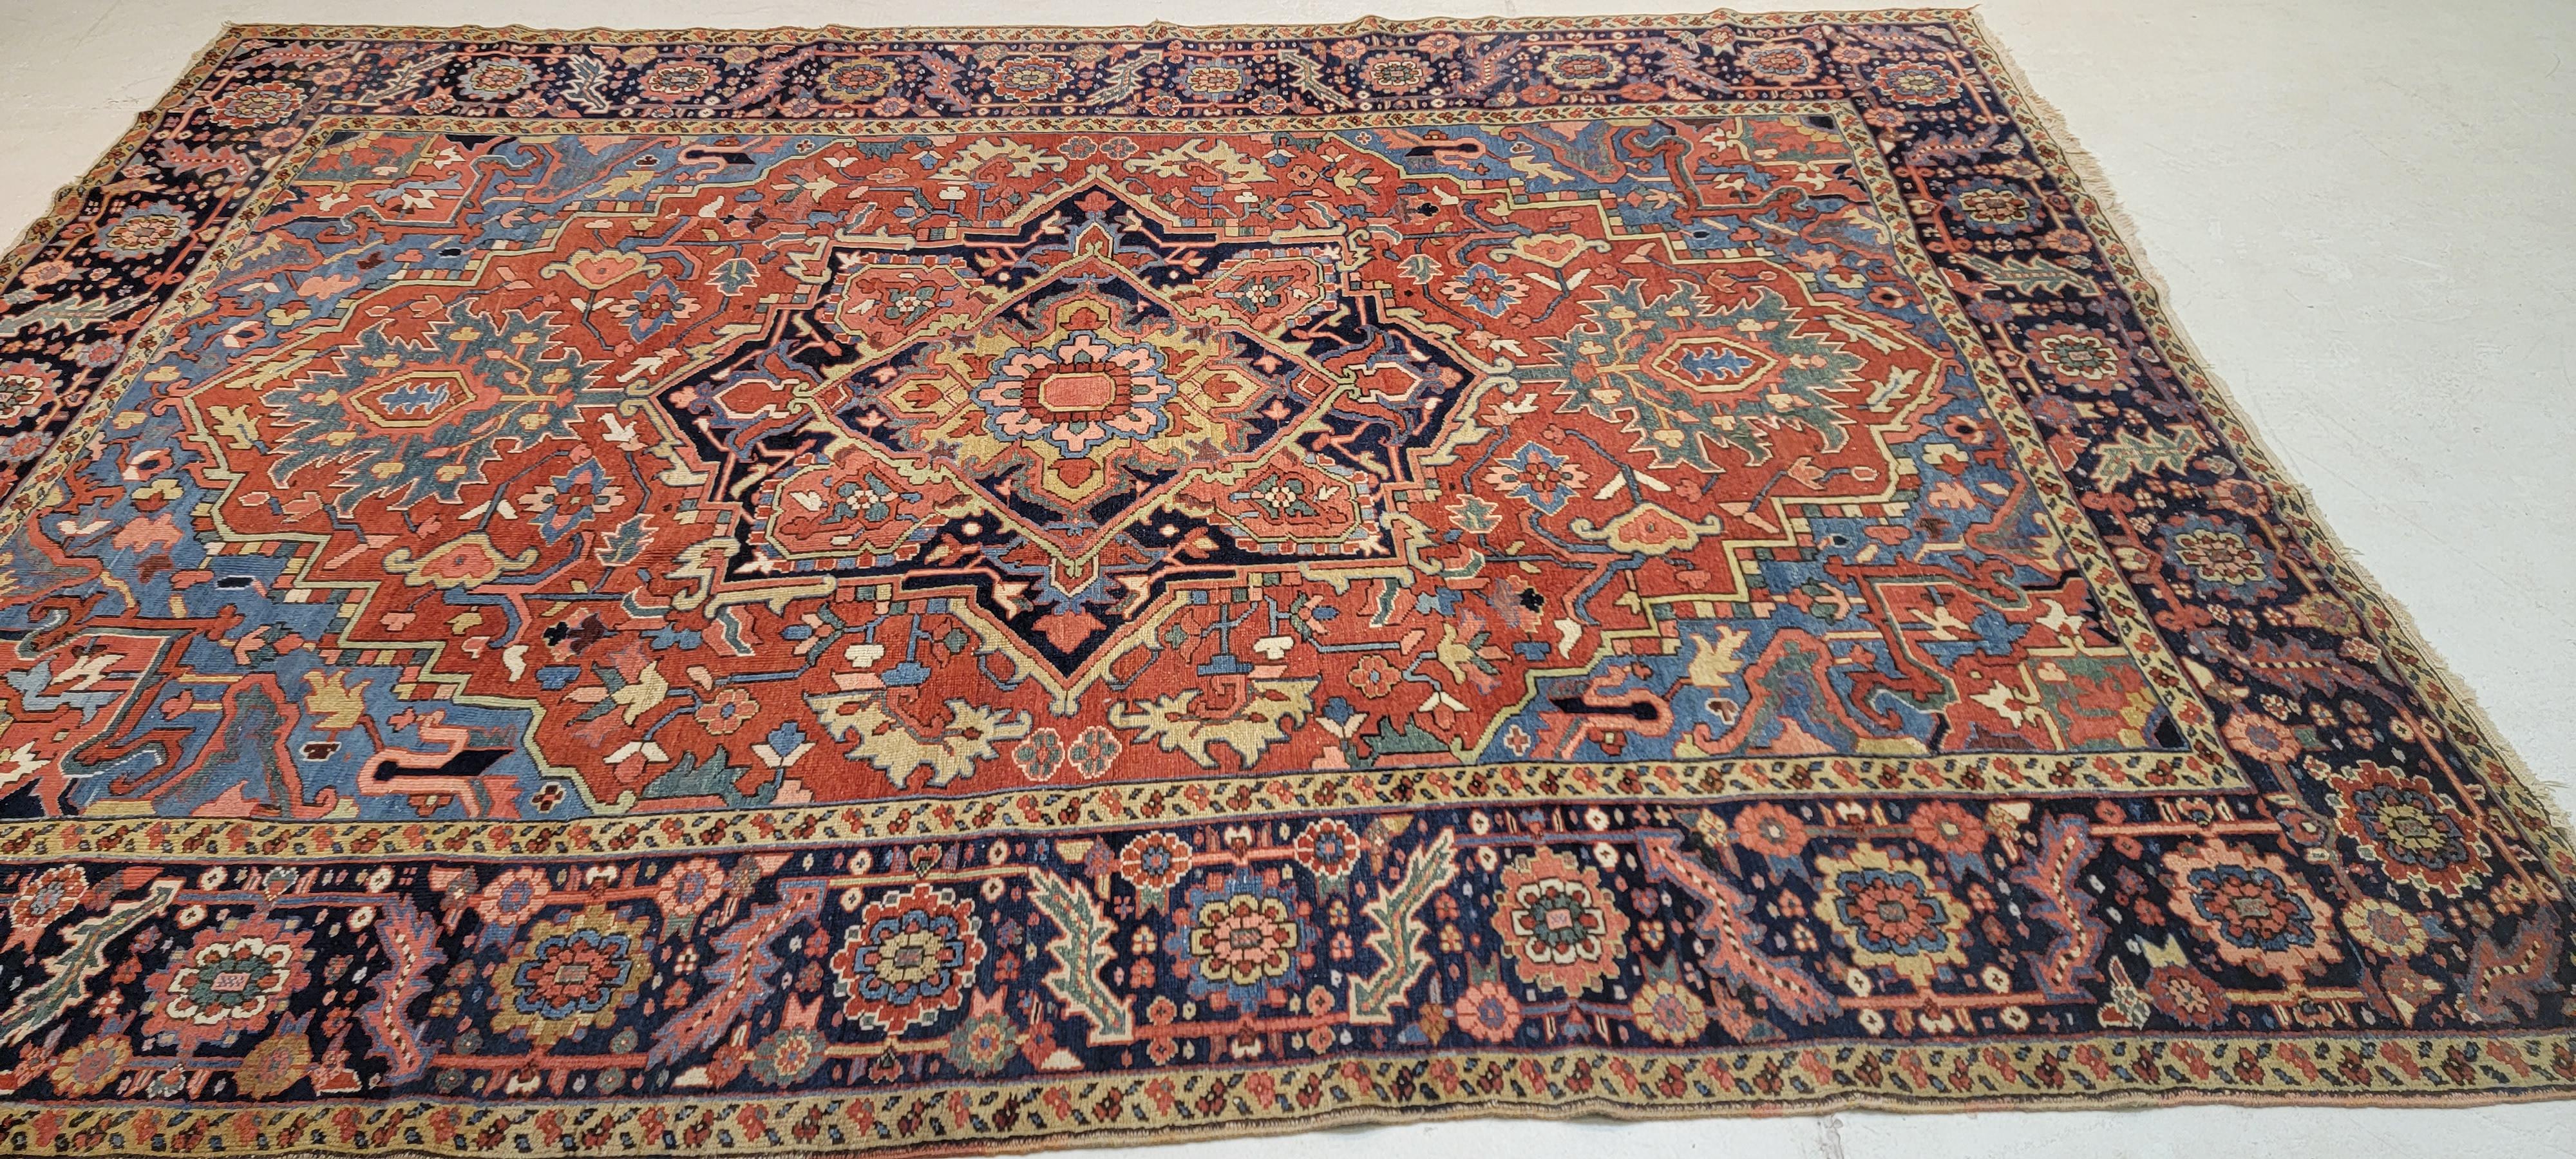 Early 20th Century Antique Persian Heriz Serapi Rug For Sale 5